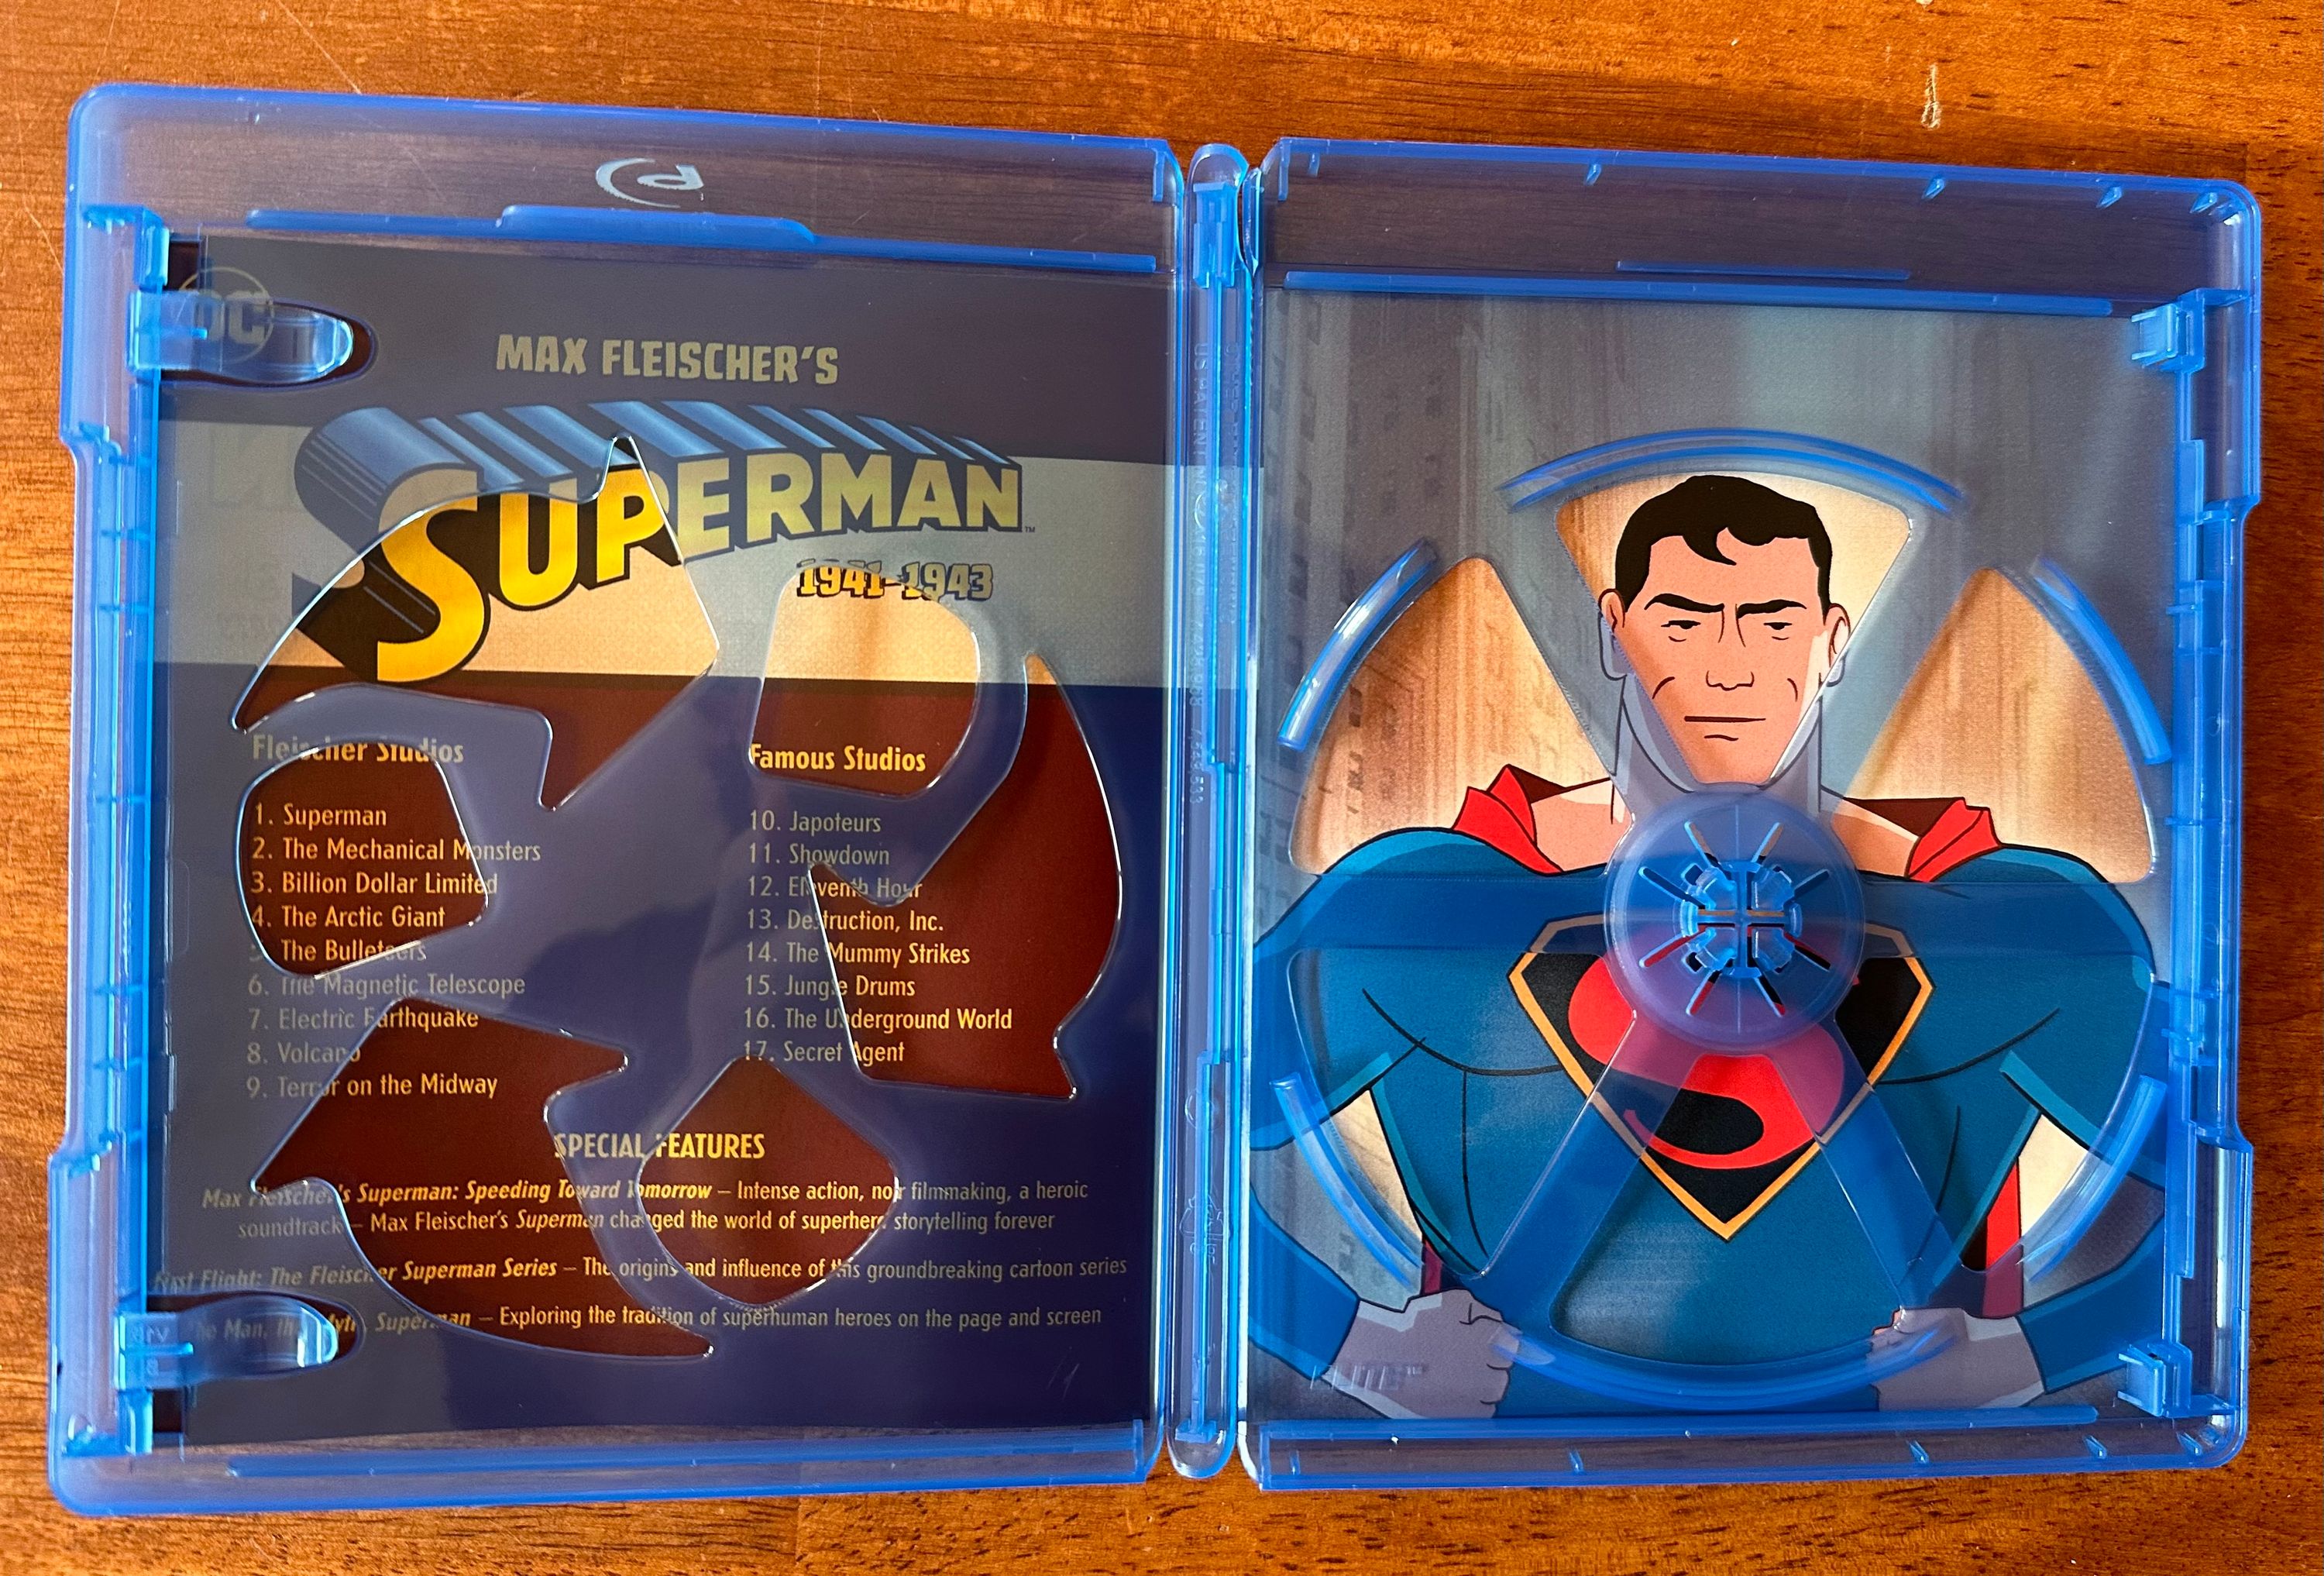 Inside the blu-ray release. Text includes list of episodes: Fleischer Studios 1. Superman 2. The Mechanical Monsters 3. Billion Dollar Limited 4. The Arctic Giant 5. The Bulleteers 6. The Magnetic Telescope 7. Electric Earthquake 8. Volcano 9. Terror on the Midway. Famous Studios 10. Japoteurs 11. Showdown 12. Eleventh Hour 13. Destruction, Inc. 14. The Mummy Strikes 15. Jungle Drums 16. The Underground World 17. Secret Agent SPECIAL FEATURES Superman: Speeding Toward Tomorrow - Intense action, noir filmmaking, a heroic soundtrack Max Fleischer’s Superman changed the world of superhero, storytelling forever. First Flight: The Fleischer Superman Series - The origins and influence of this groundbreaking cartoon series. The Man, the Myth, Superman - Exploring the traction of superhuman heroes on the page and screen. On the right there is an image of Superman in front of a city street